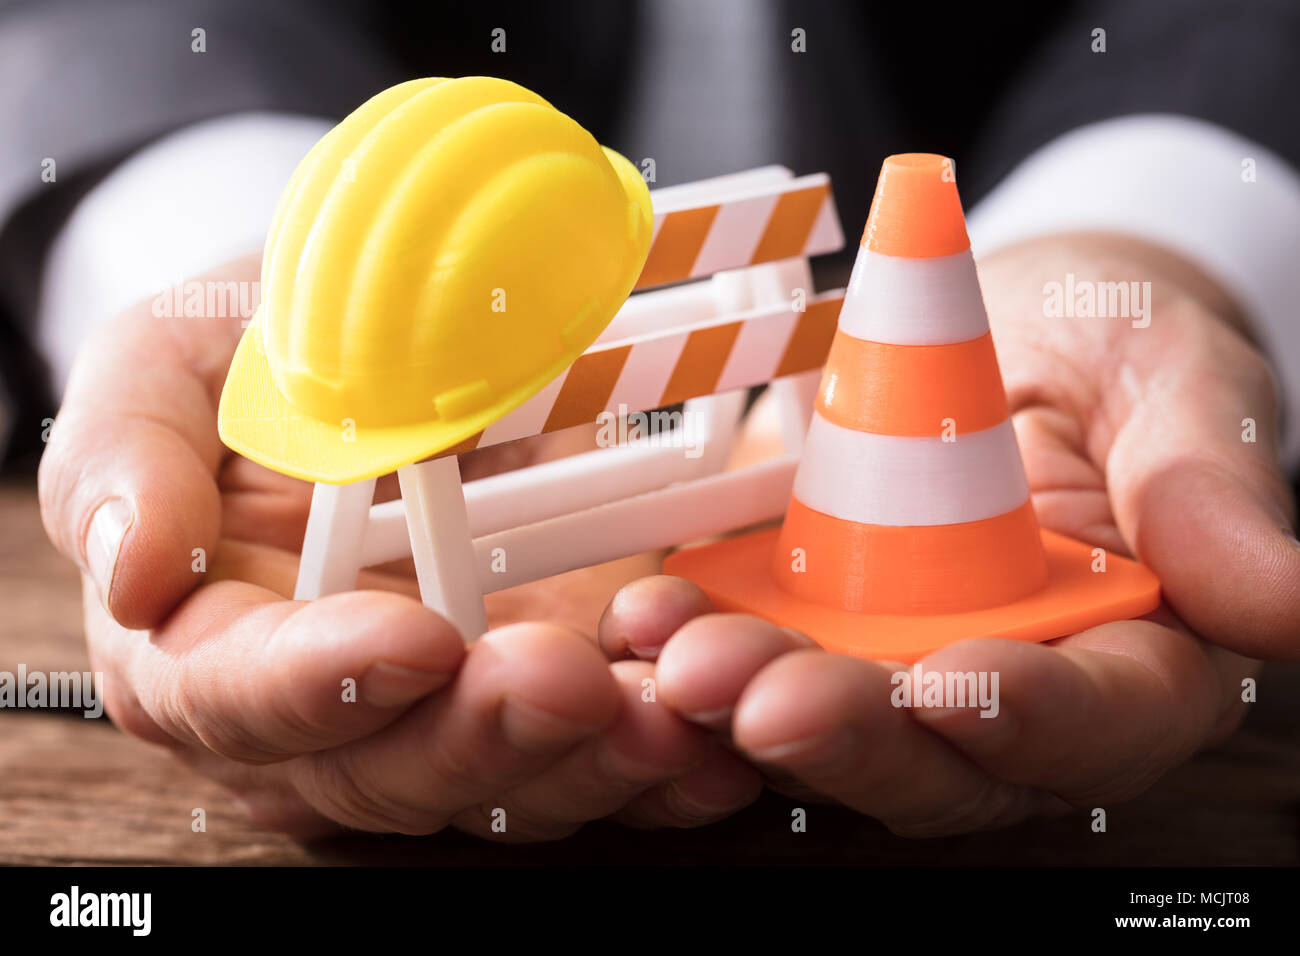 Close-up Of Human Hand Holding Barricade With Traffic Cone And Hard Hat Stock Photo